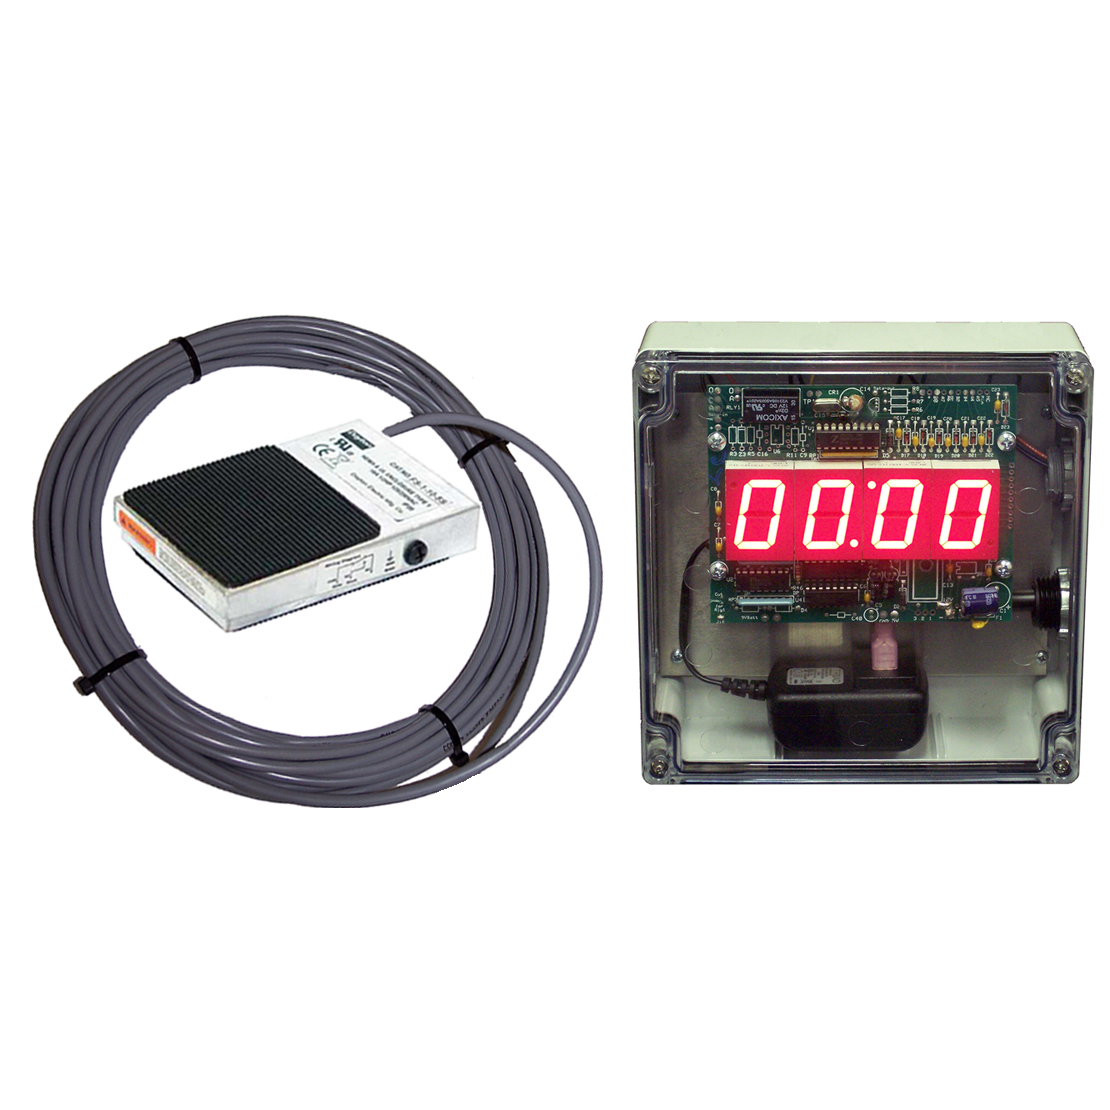 (DC-10T-DN-BCD-FOOT-EOP-NEMA) 1.0 Inch LED, BCD Rotary Switch Set, Foot-Switch Controlled, Digital Countdown Process Timer with EOP Buzzer, Nema 4X,6,6P,12,12K,13, IP-66 Enclosure